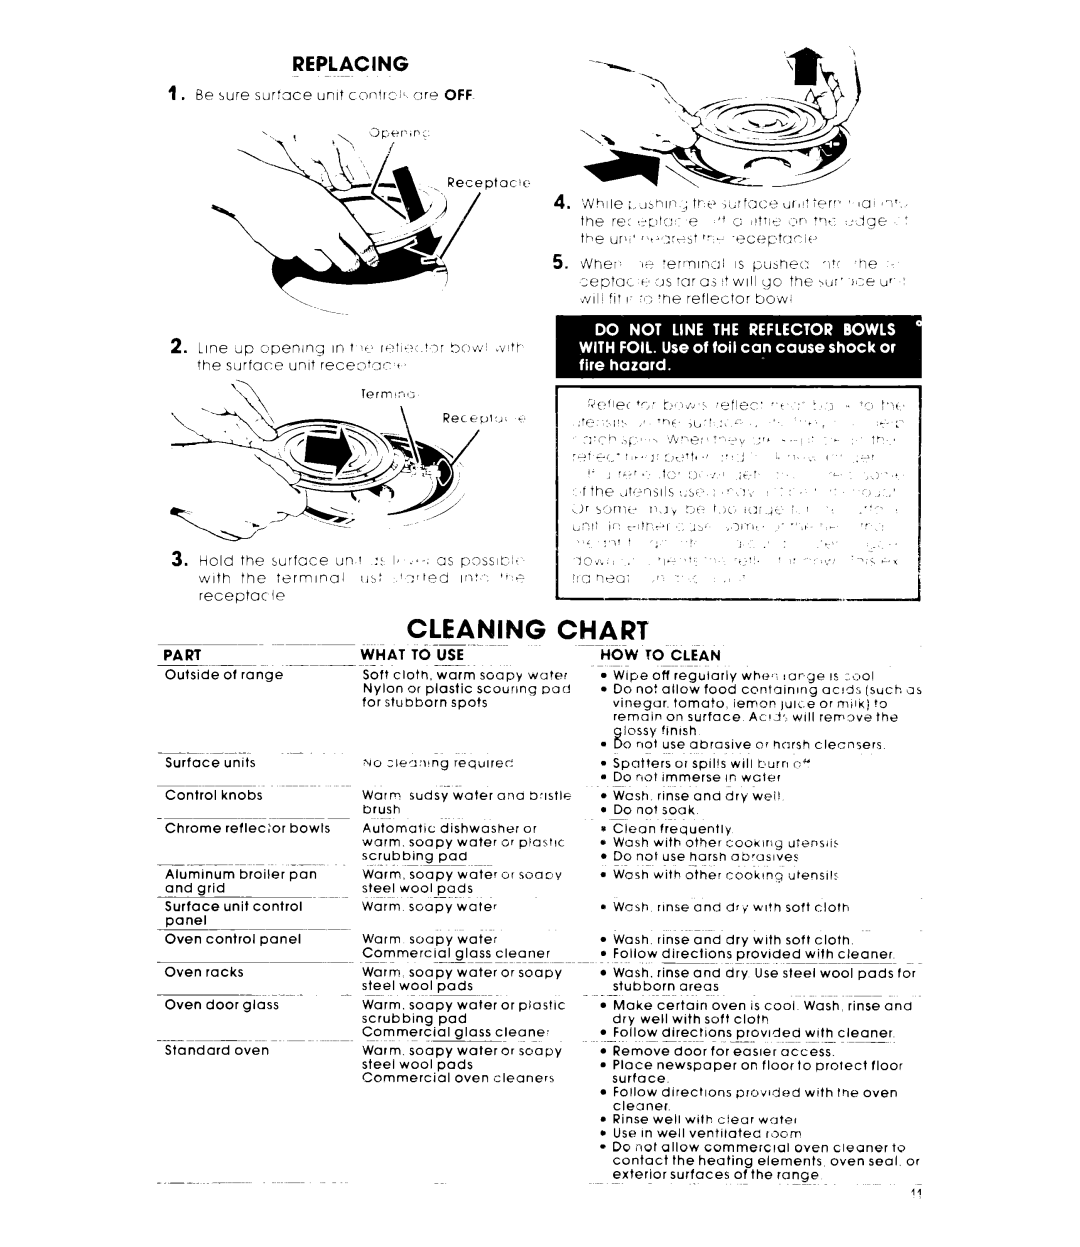 Whirlpool RS61OPXK, RS61OOXK warranty Cleaning Chart, Replacing 